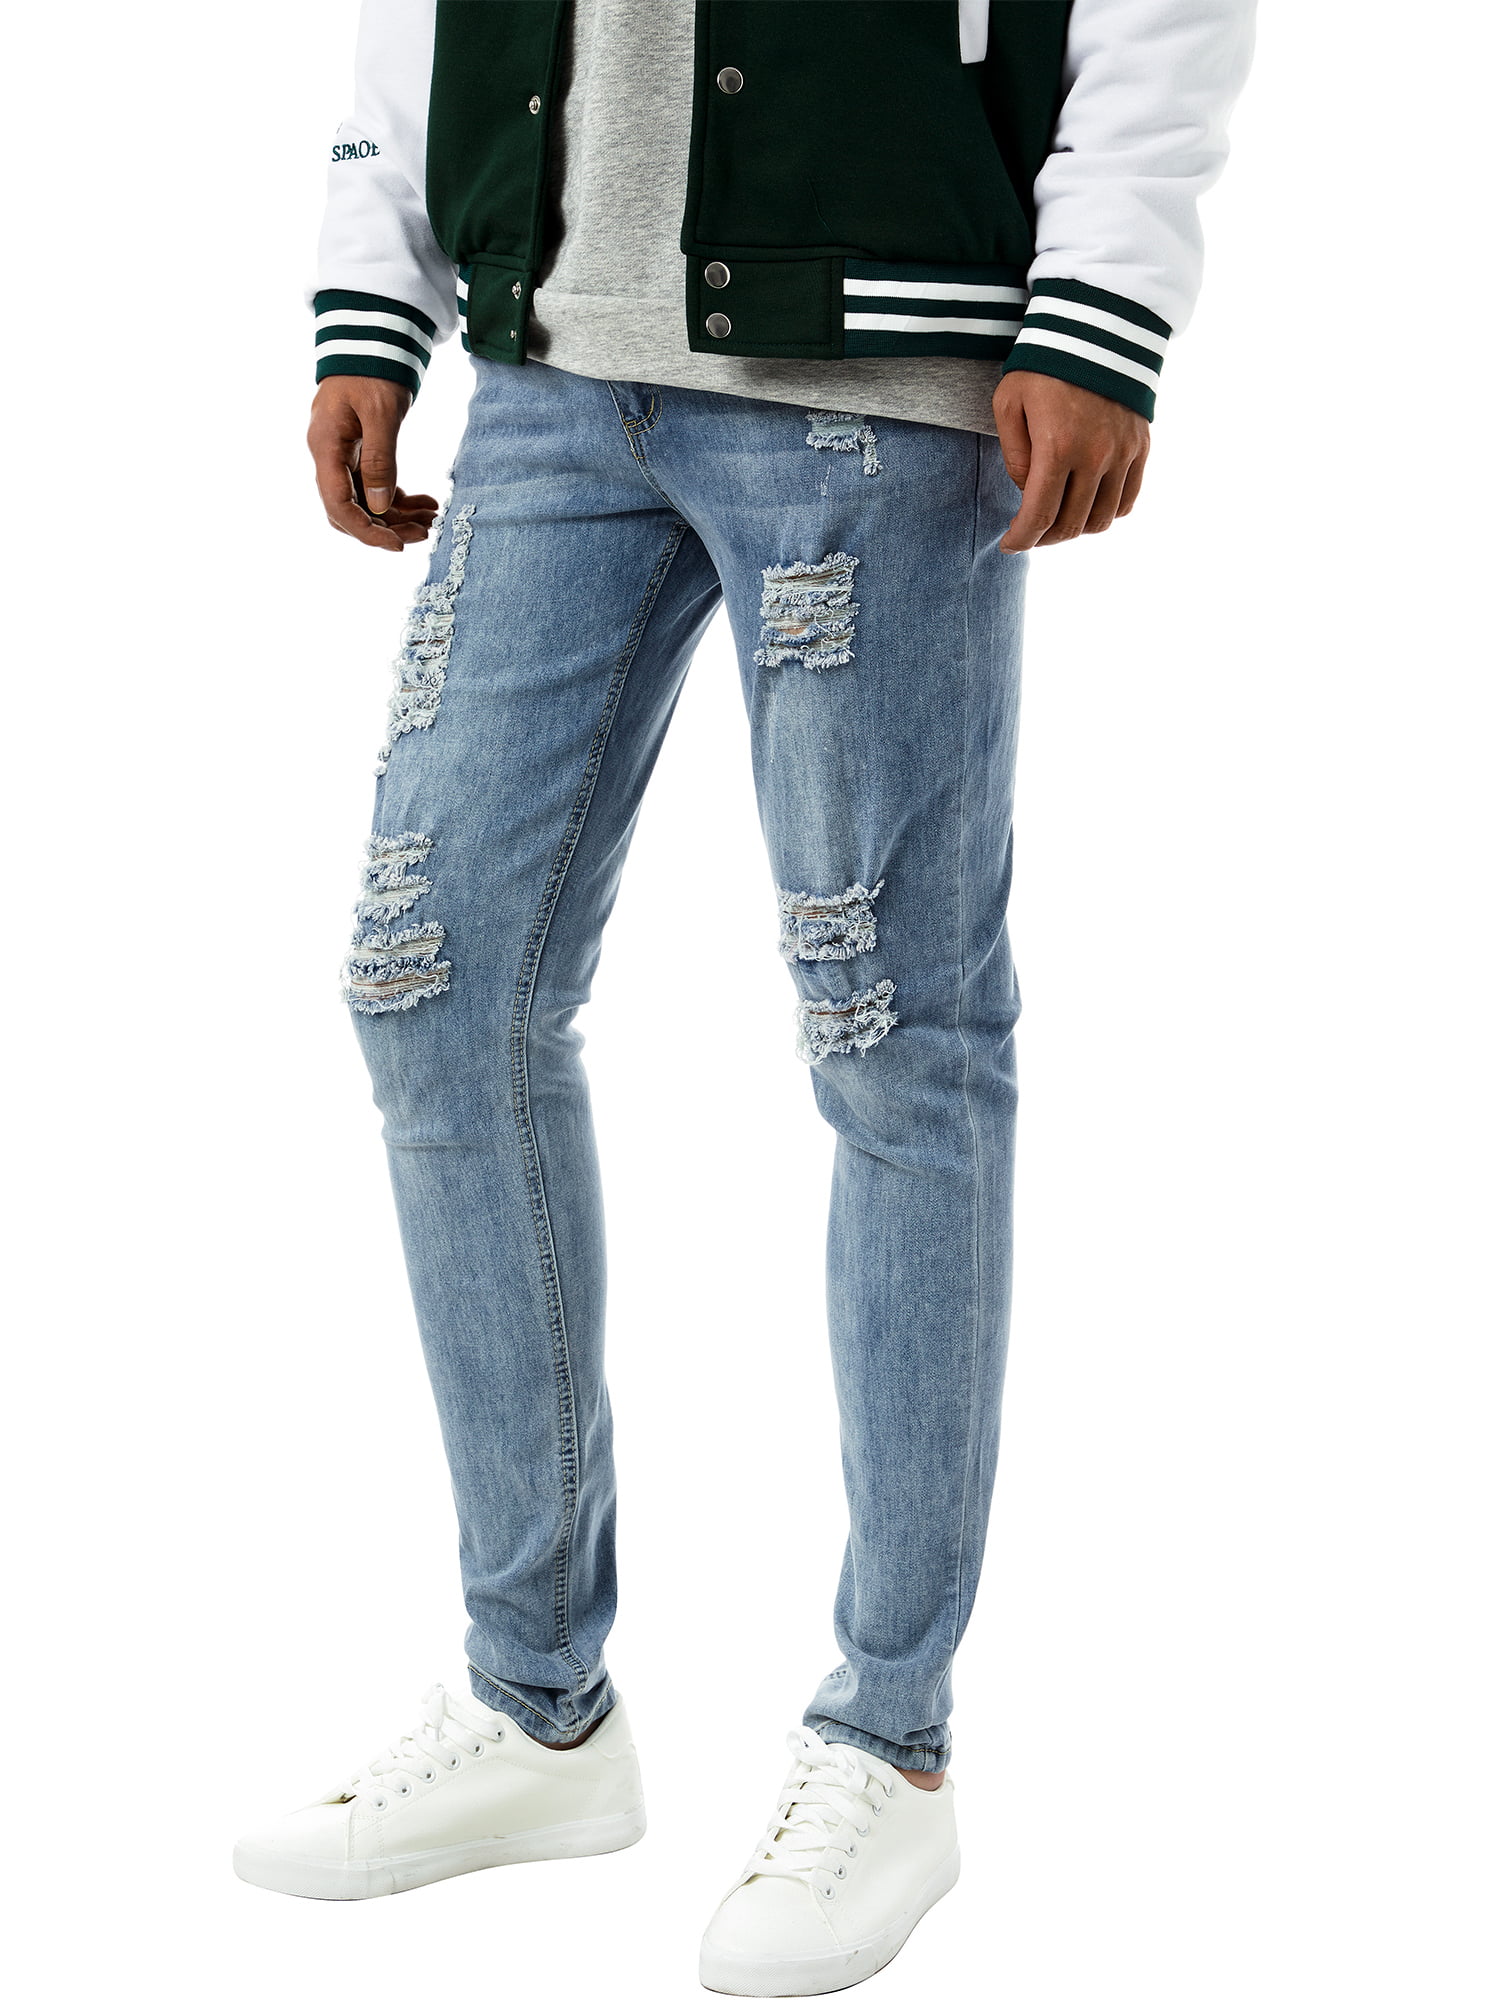 Frontwalk Men Ripped Skinny Jeans Distressed Destroyed Slim Fit Denim Jeans  Stretch Biker Jeans Pants with Holes